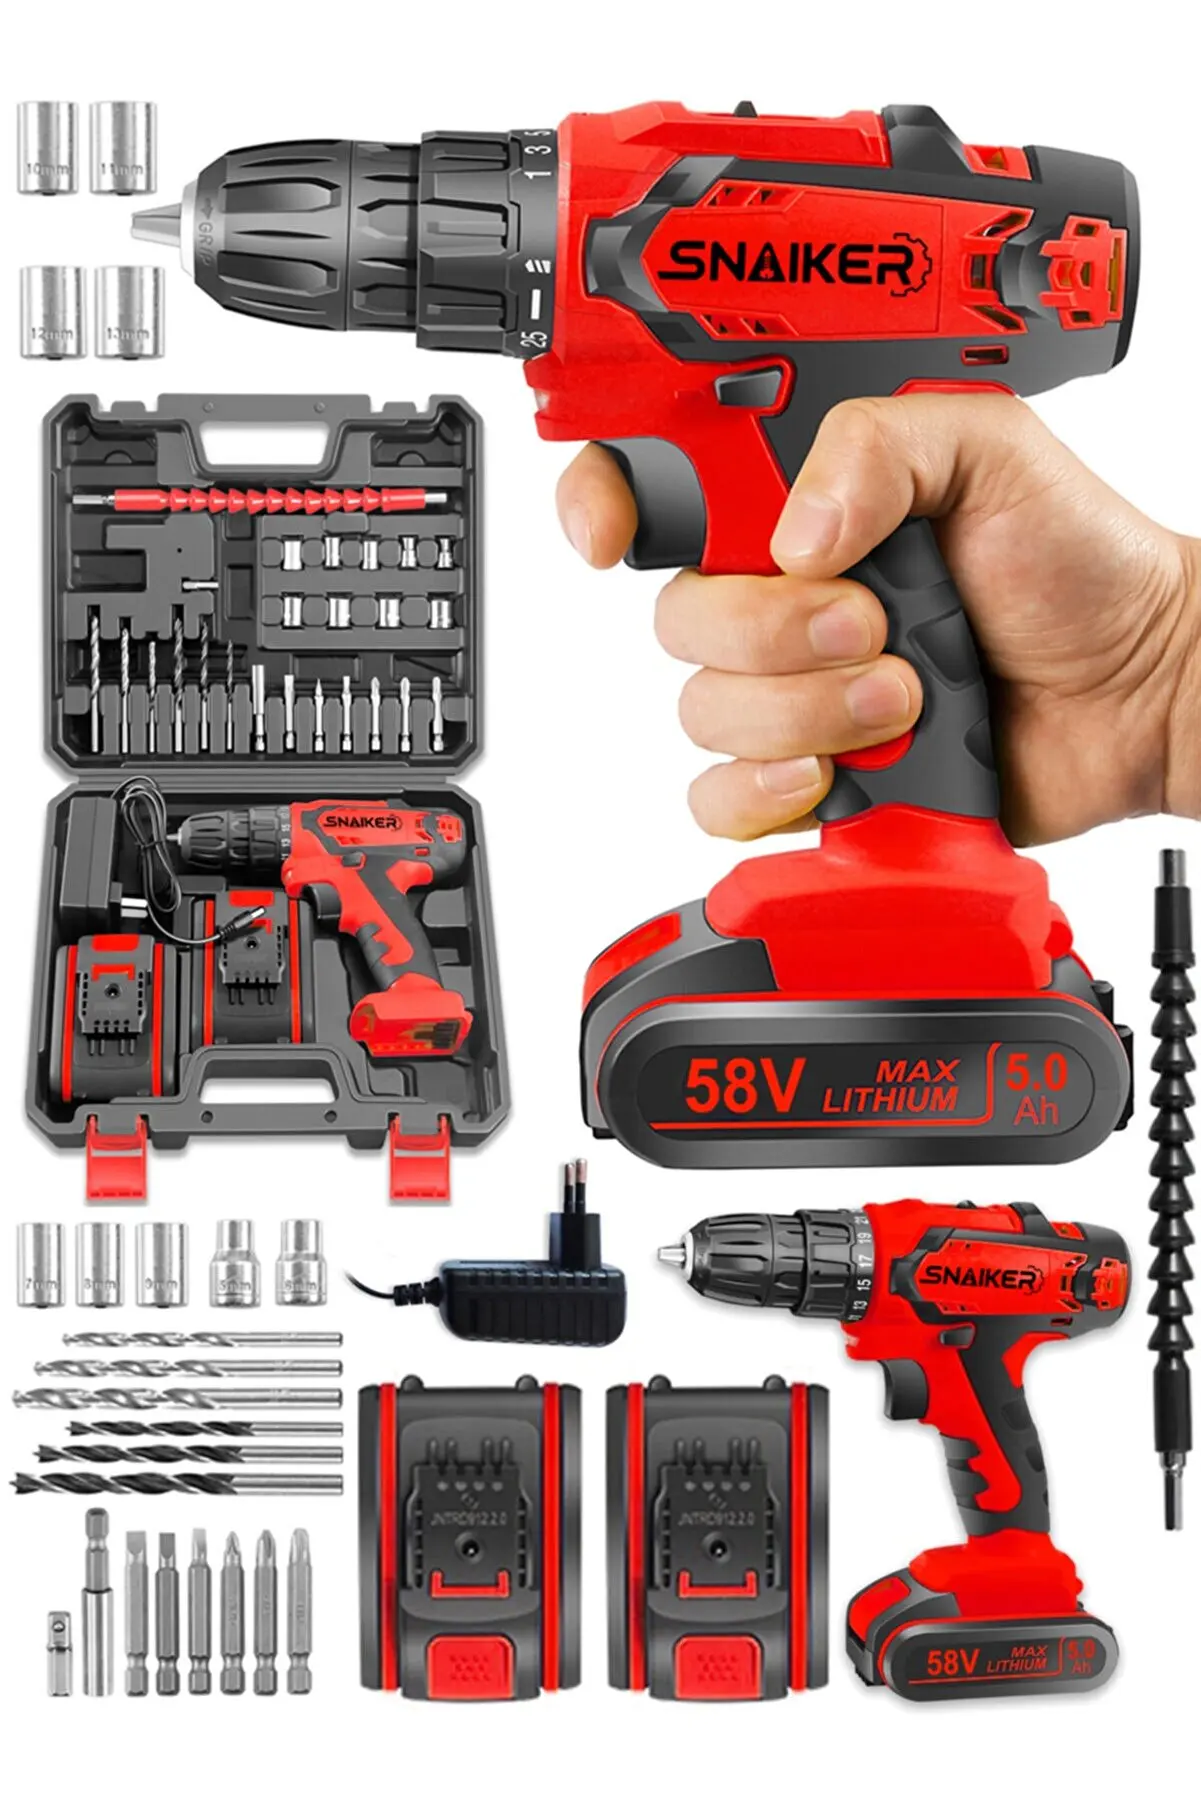 SNAİKER German 58 V 5 Ah Cooper Darbeli Double Metal Transmission Copper Wrapped Rechargeable Dual Cordless screwdriver Drill